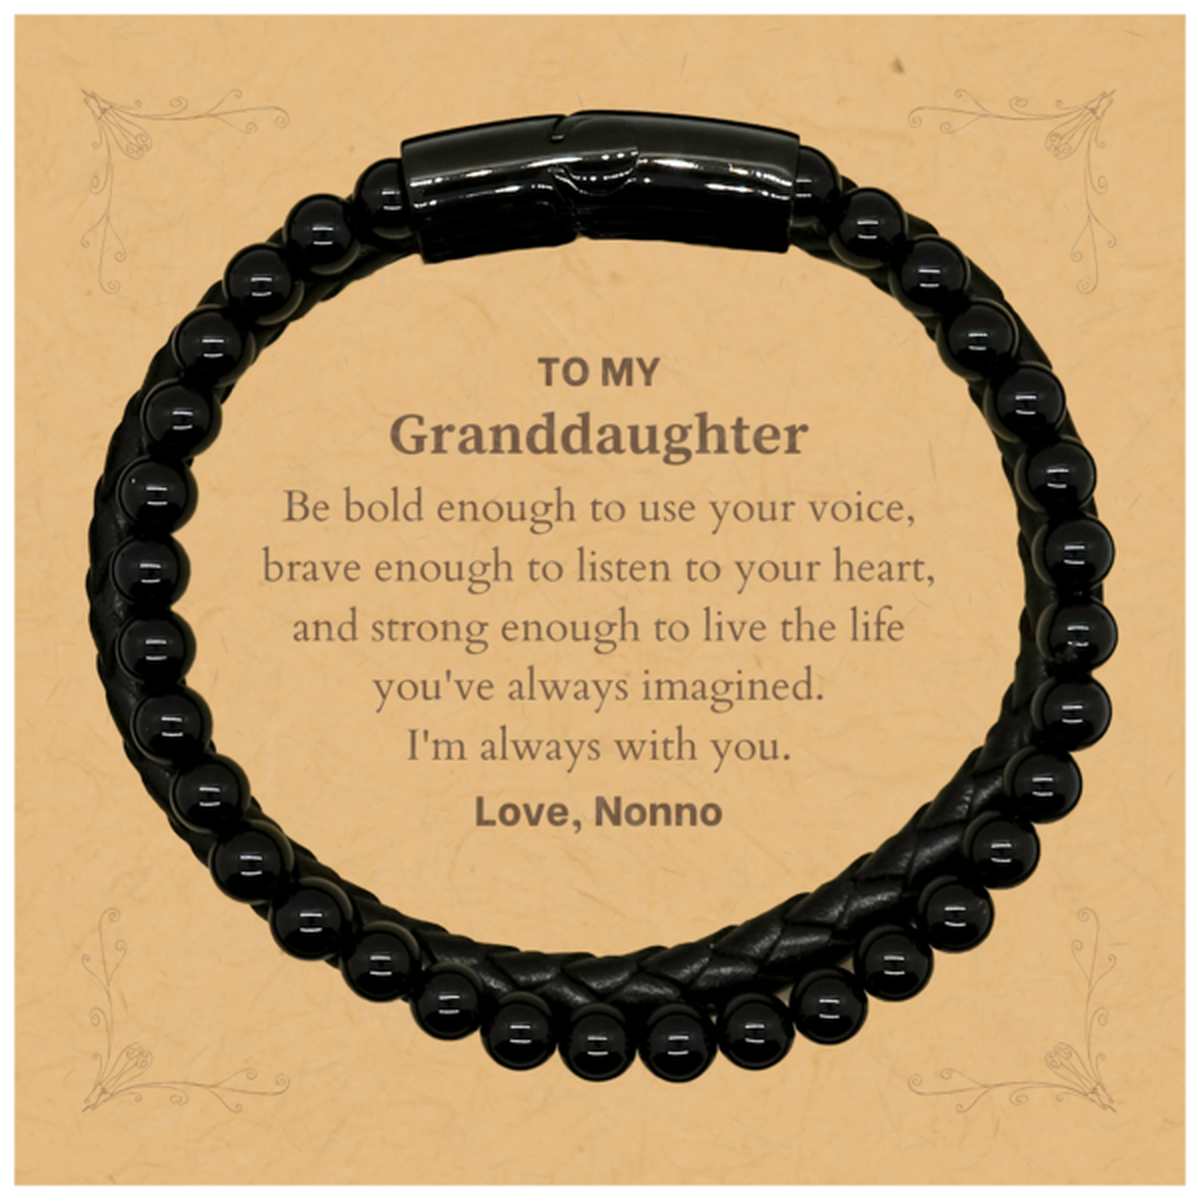 Keepsake Granddaughter Stone Leather Bracelets Gift Idea Graduation Christmas Birthday Granddaughter from Nonno, Granddaughter Be bold enough to use your voice, brave enough to listen to your heart. Love, Nonno